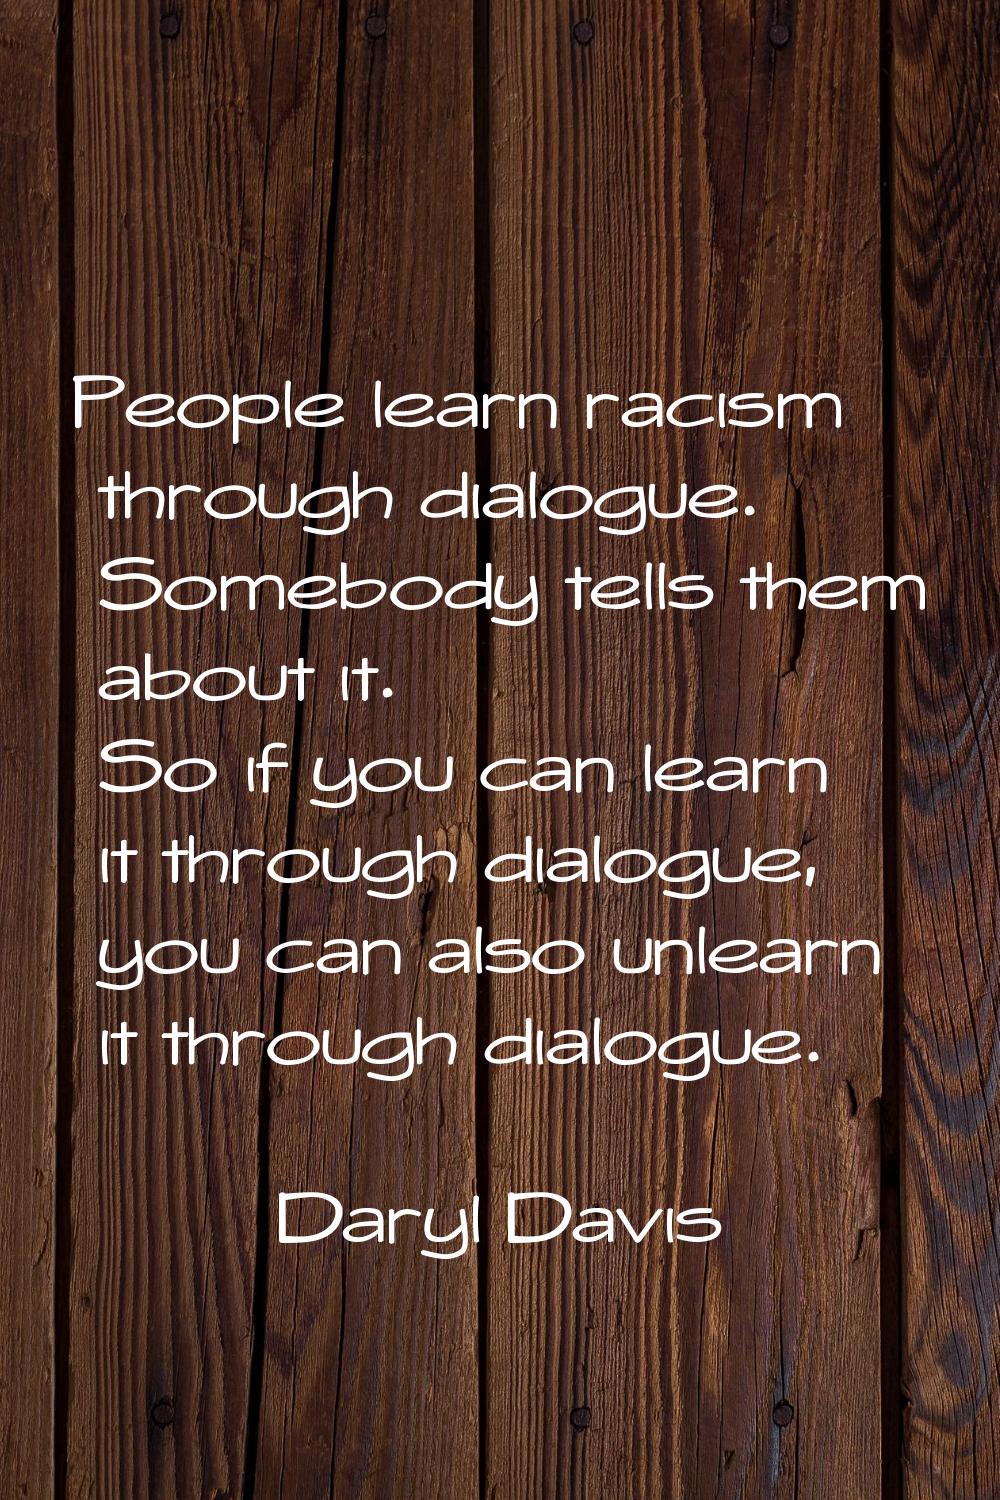 People learn racism through dialogue. Somebody tells them about it. So if you can learn it through 